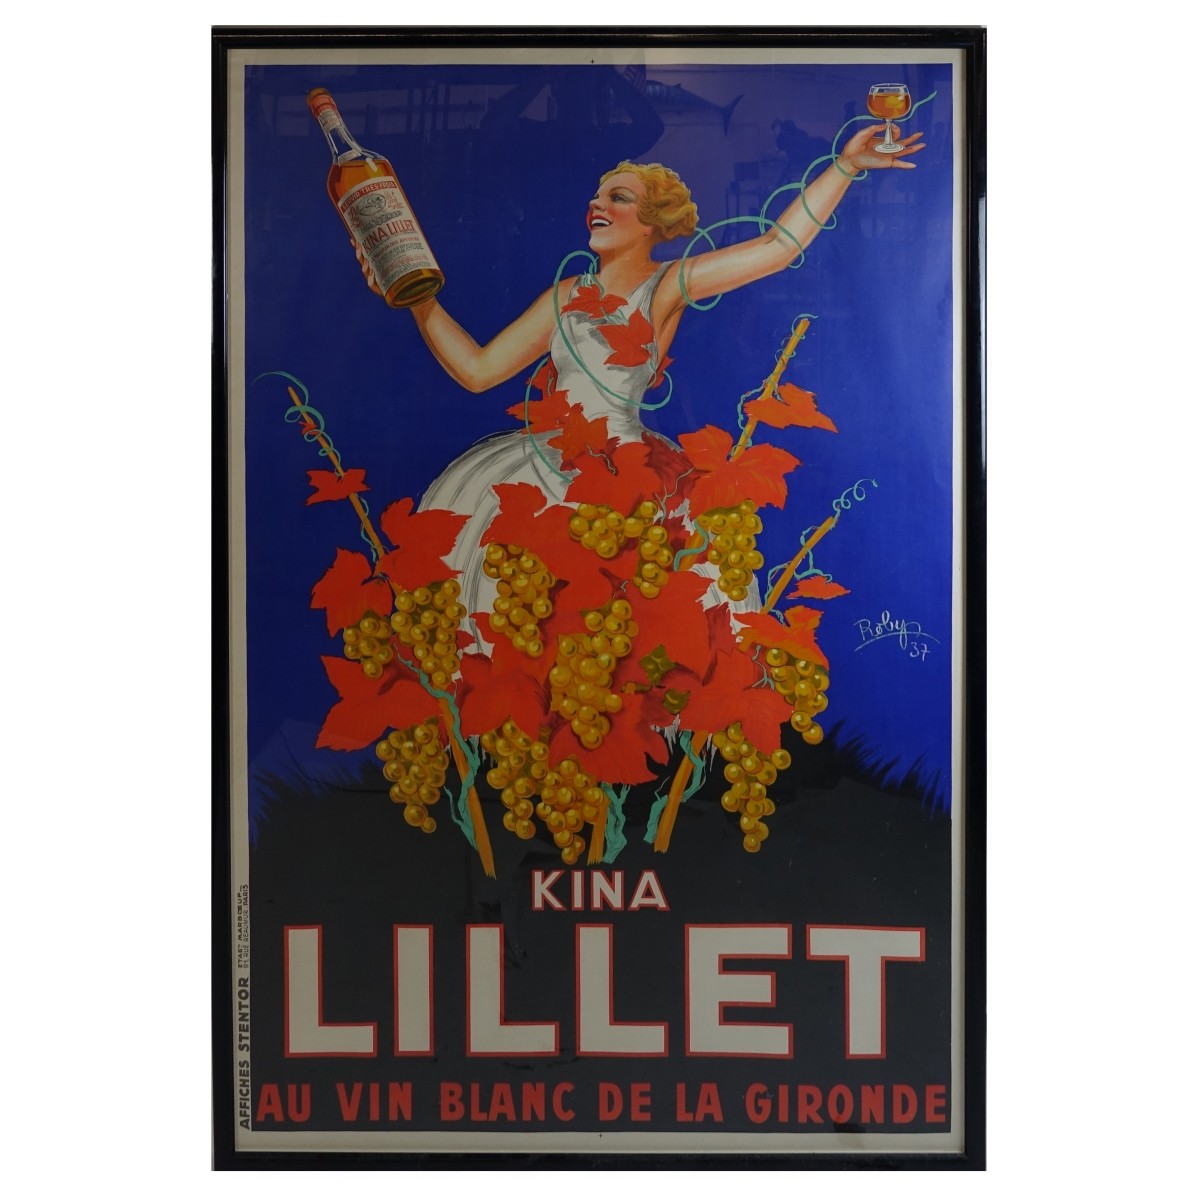 Robys (French 1916- ) "Kina Lillet" Lithograph